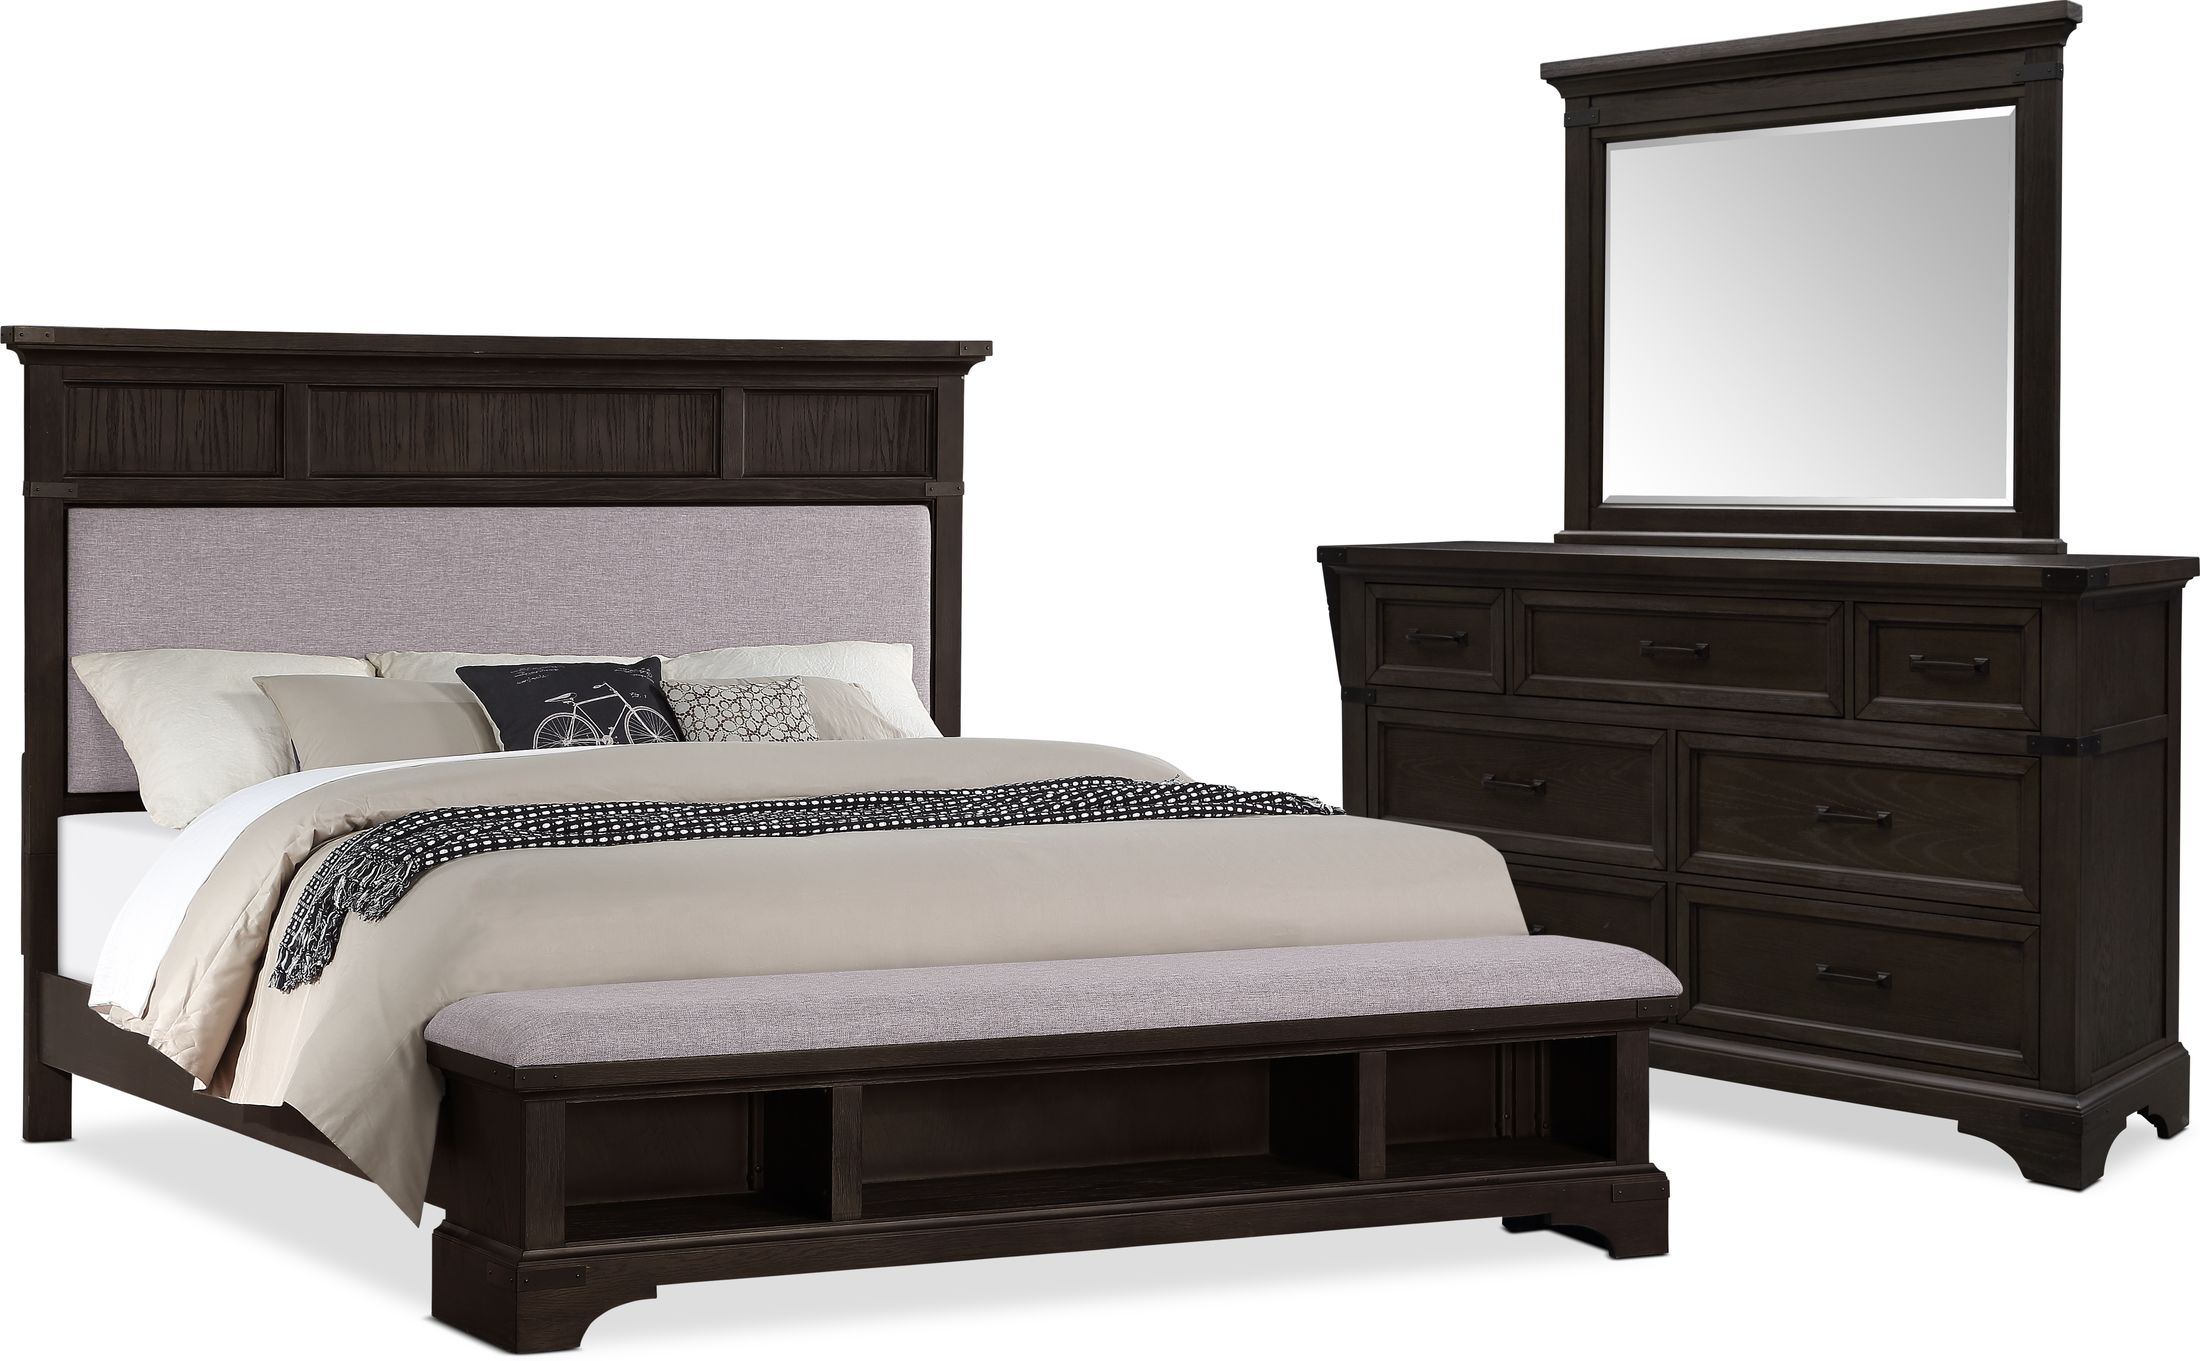 Victor 5 Piece Storage Bedroom Set With Dresser And Mirror Value City Furniture